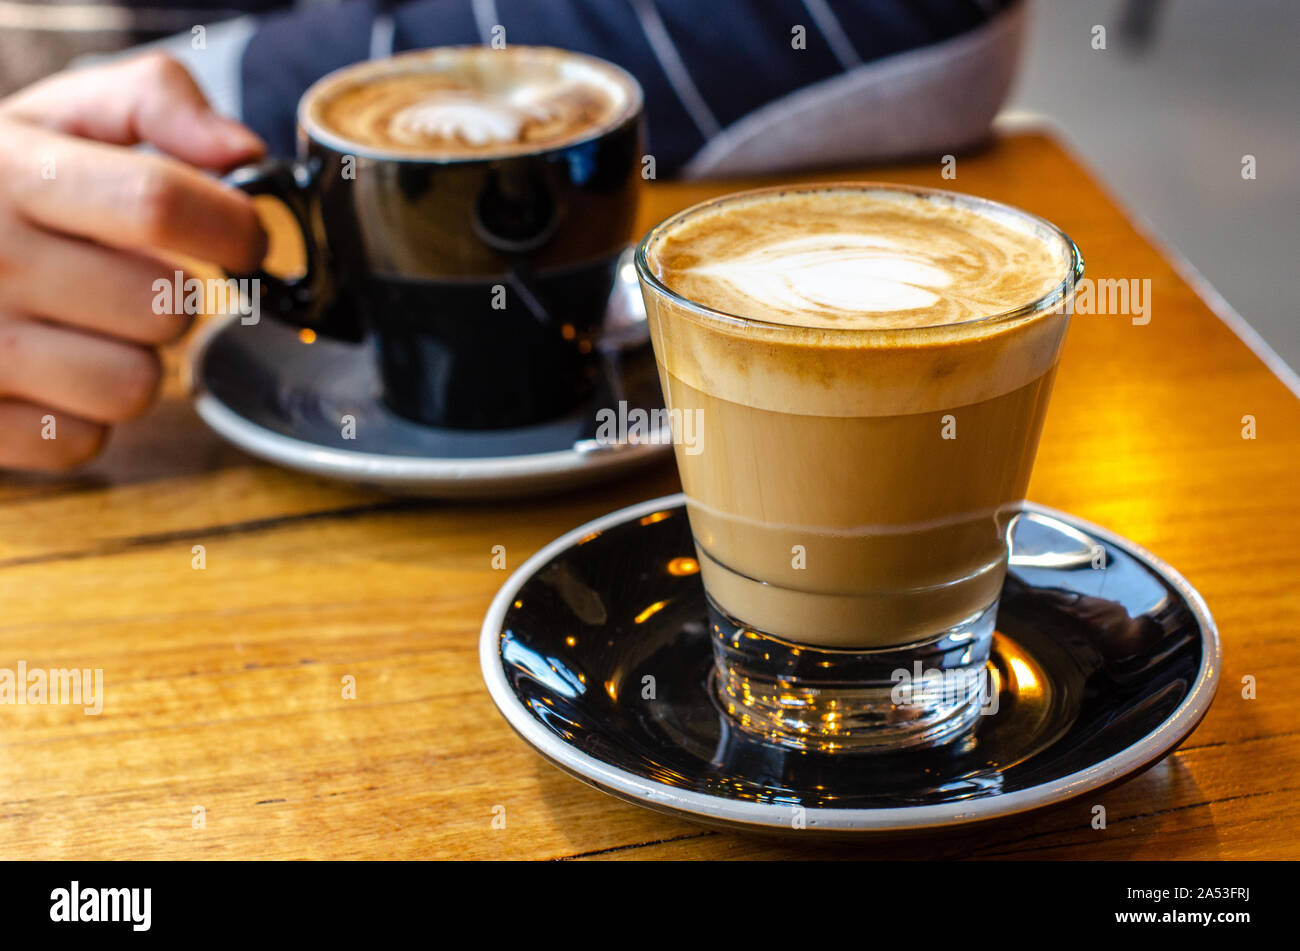 Close up of a cup of cafe latte with a blurry background of a man's hand holding his coffee on the opposite side of the table. Stock Photo